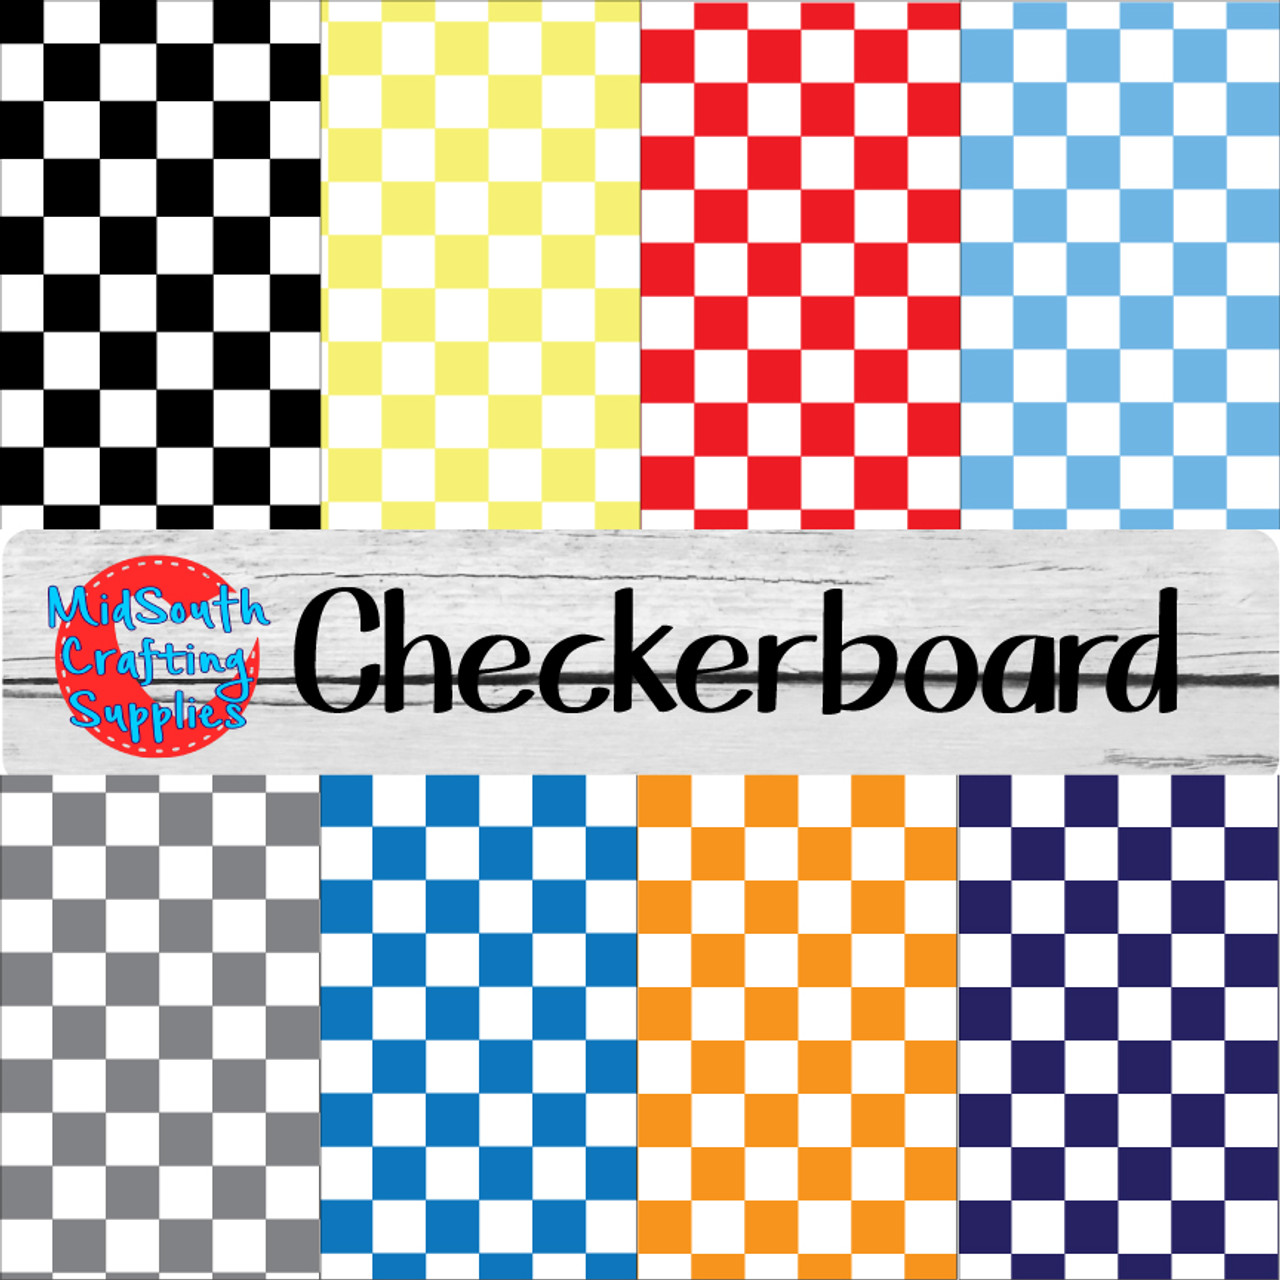 U&A Heat Transfer Vinyl Checkerboard Pattern HTV Rolls - 12inch*5ft Checkered Iron on for Shirts Fabrics DIY Easy to Cut & Weed Press Design